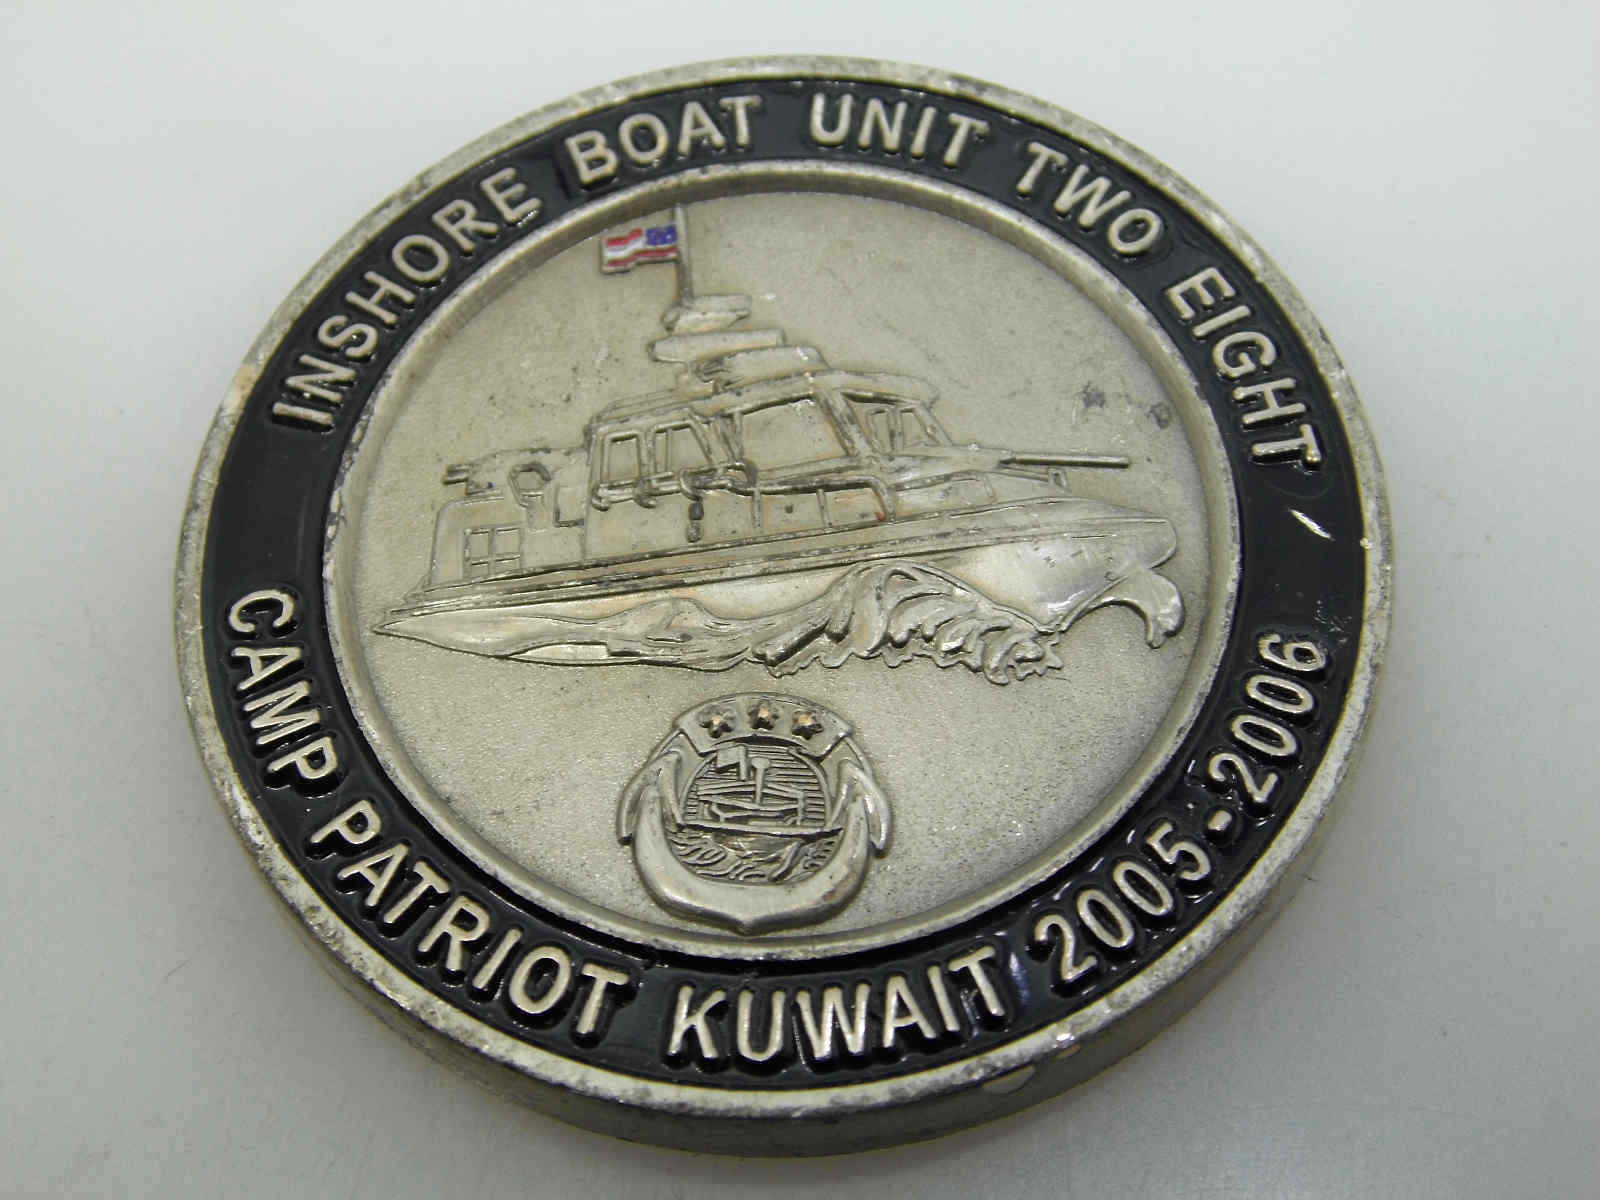 INSHORE BOAT UNIT TWO EIGHT CAMP PATRIOT KUWAIT OIF 2005-2006 CHALLENGE COIN